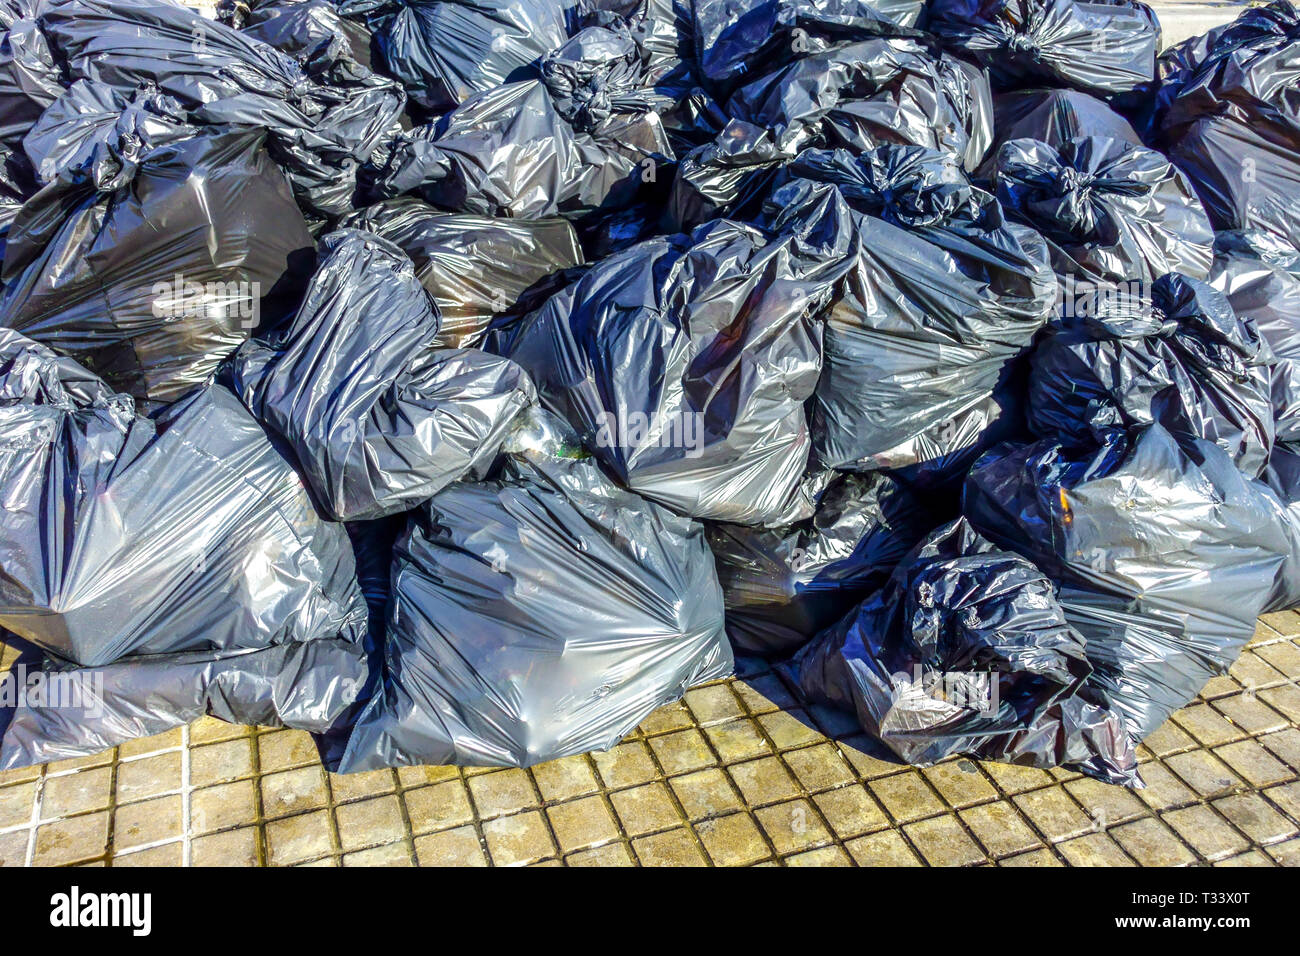 Black plastic bags filled with waste Stock Photo